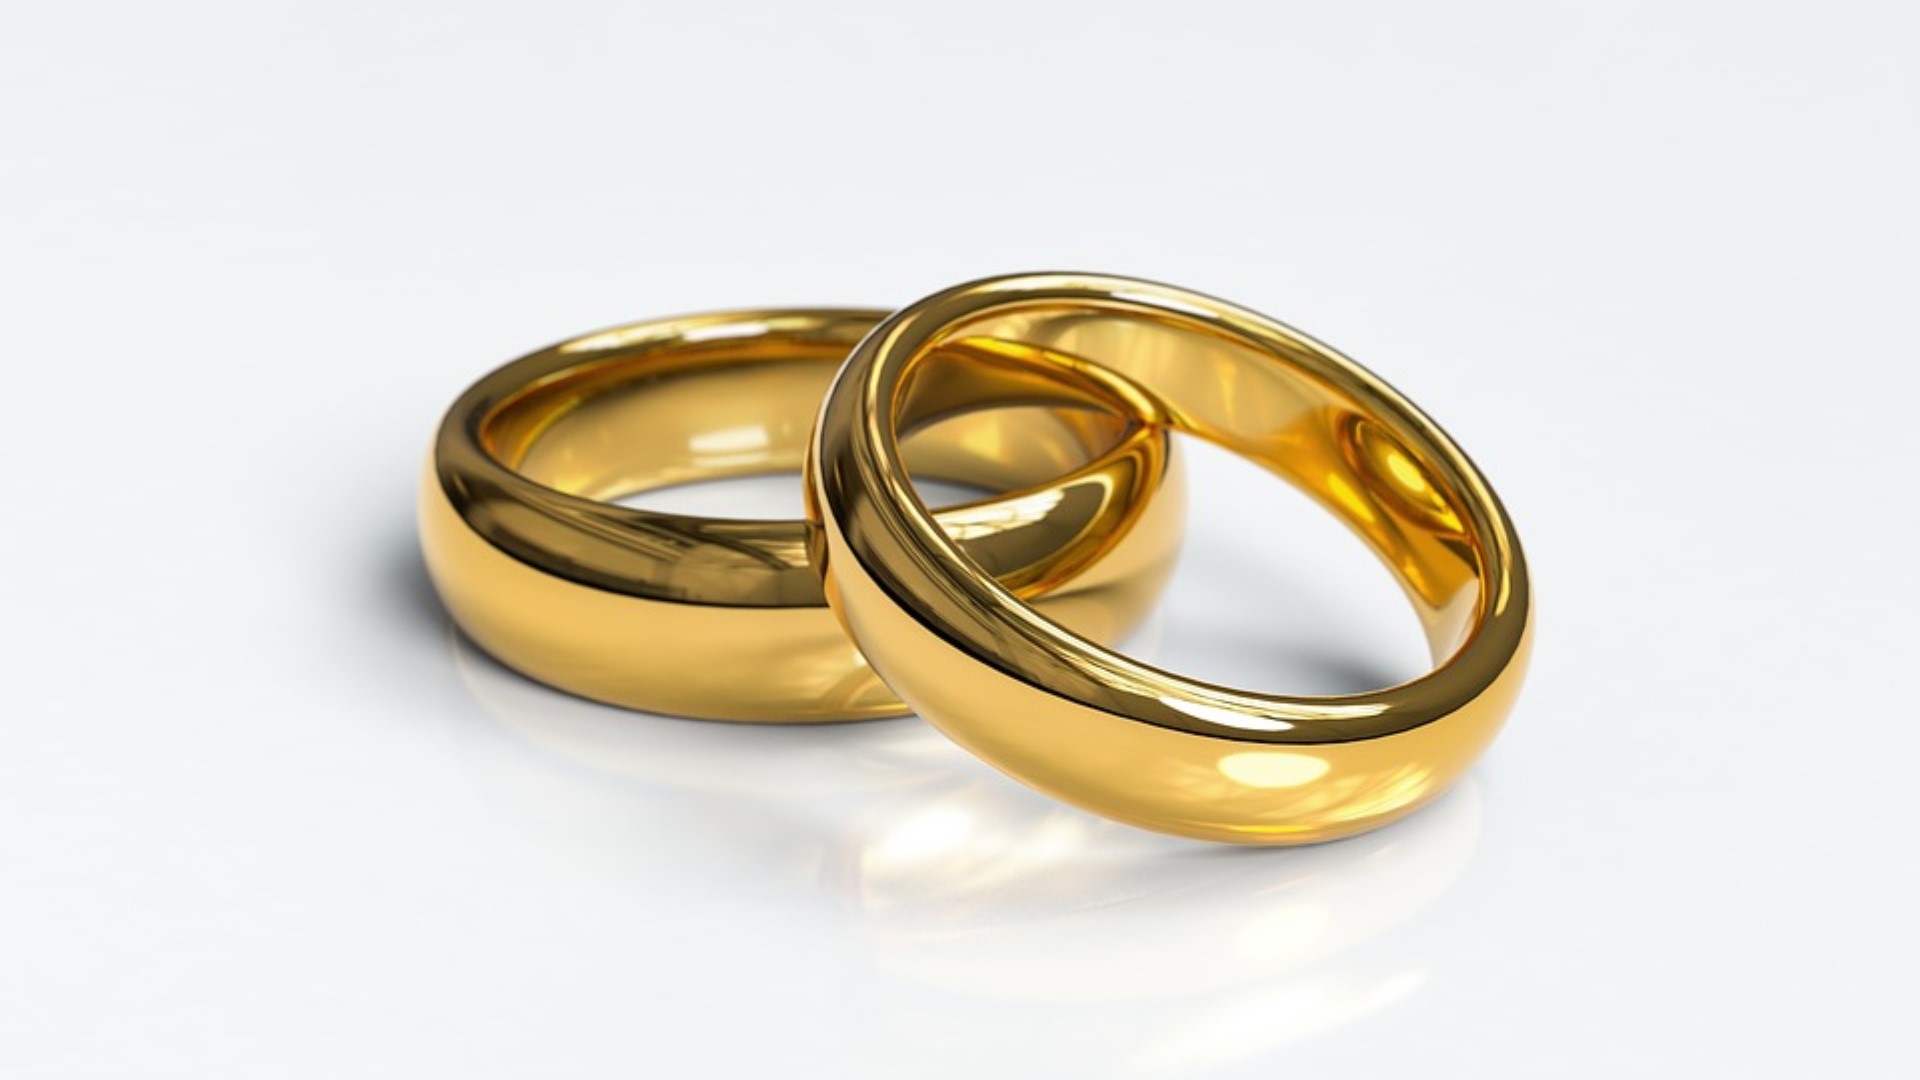 A study in Sweden suggests happily married men may be less likely to suffer heart attacks.